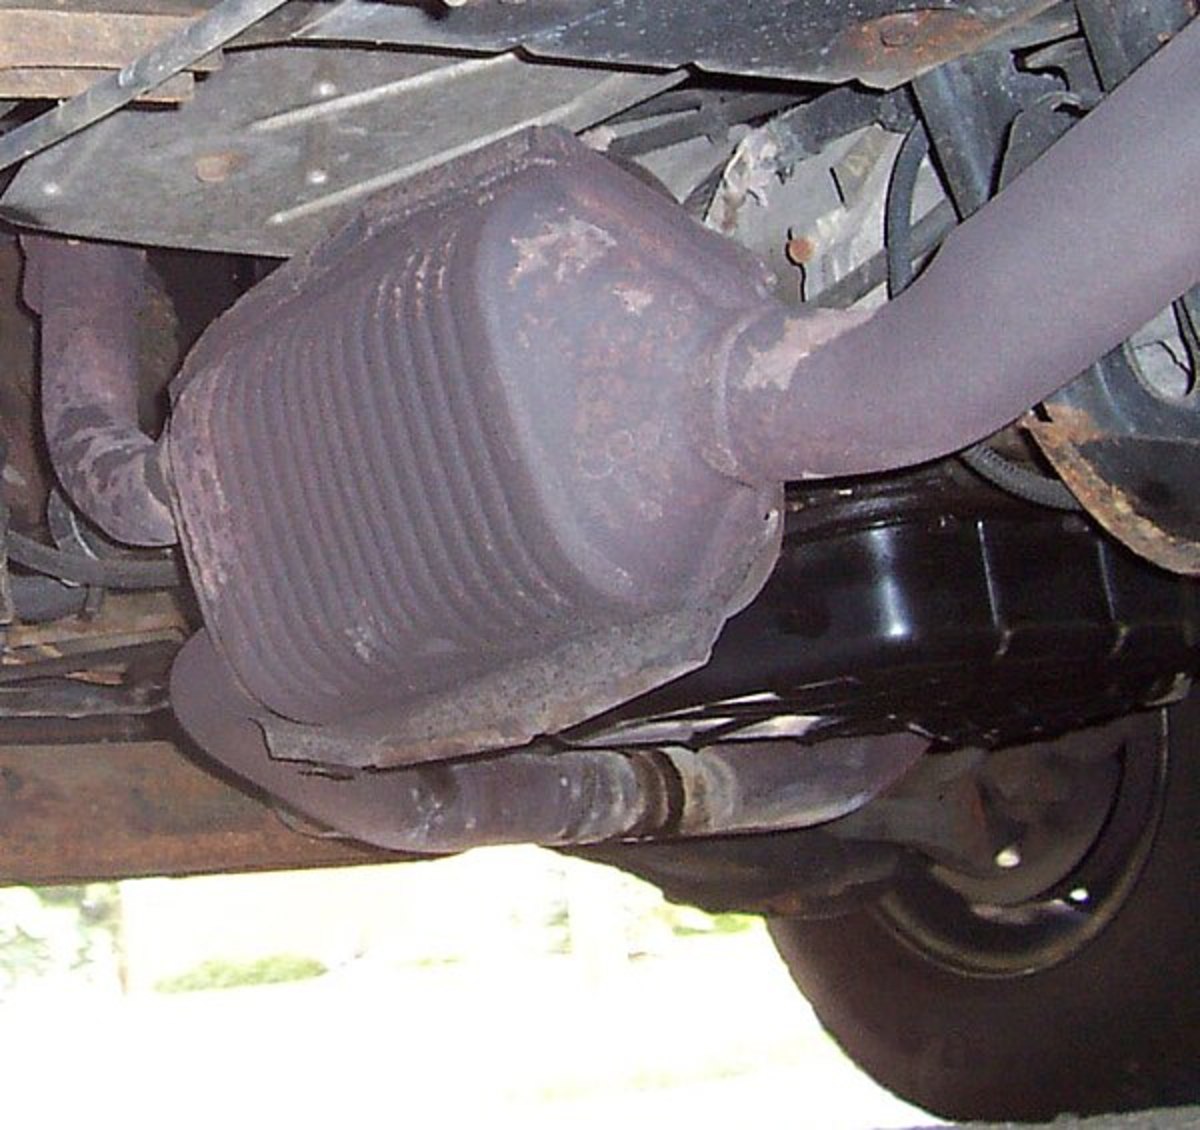 How to Temporarily Repair Your Vehicle After the Catalytic Converter is Stolen